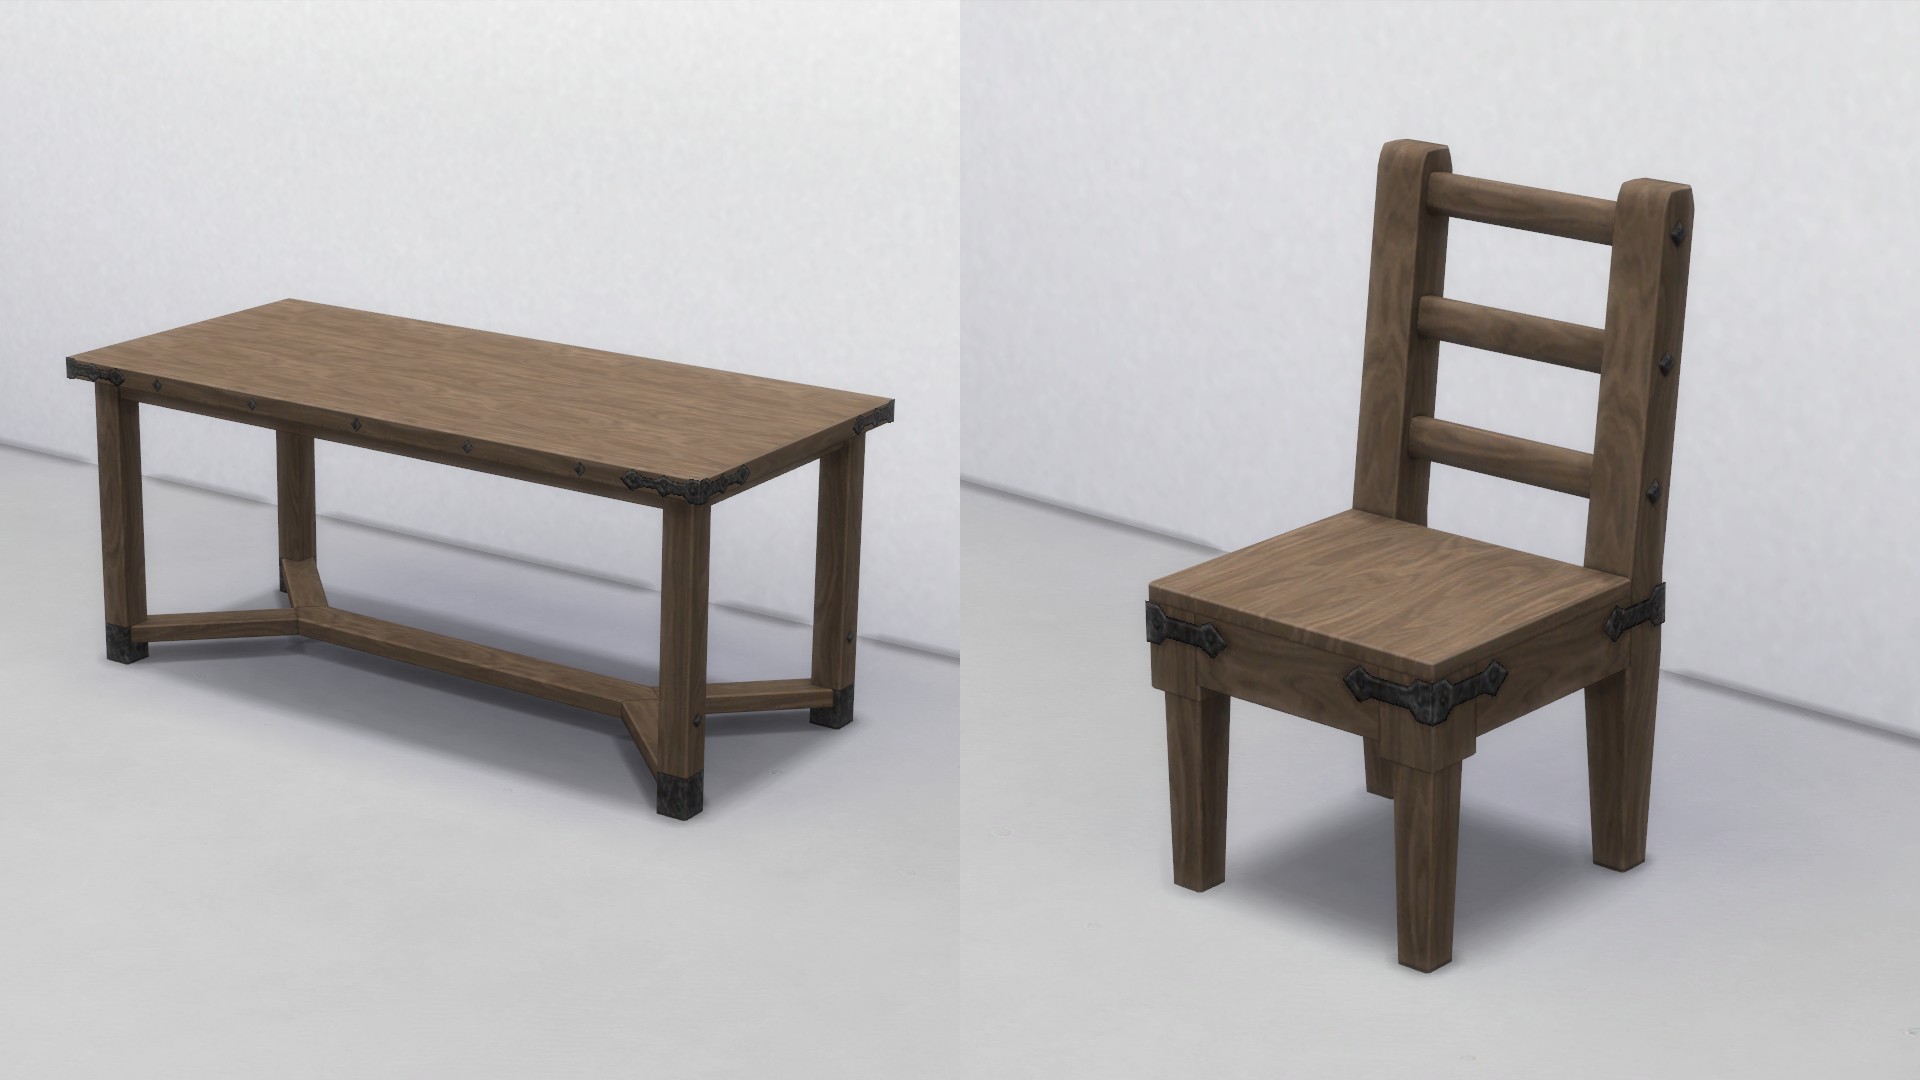 Mod The Sims Ranch Dining Table Chair, Ranch Style Dining Table And Chairs